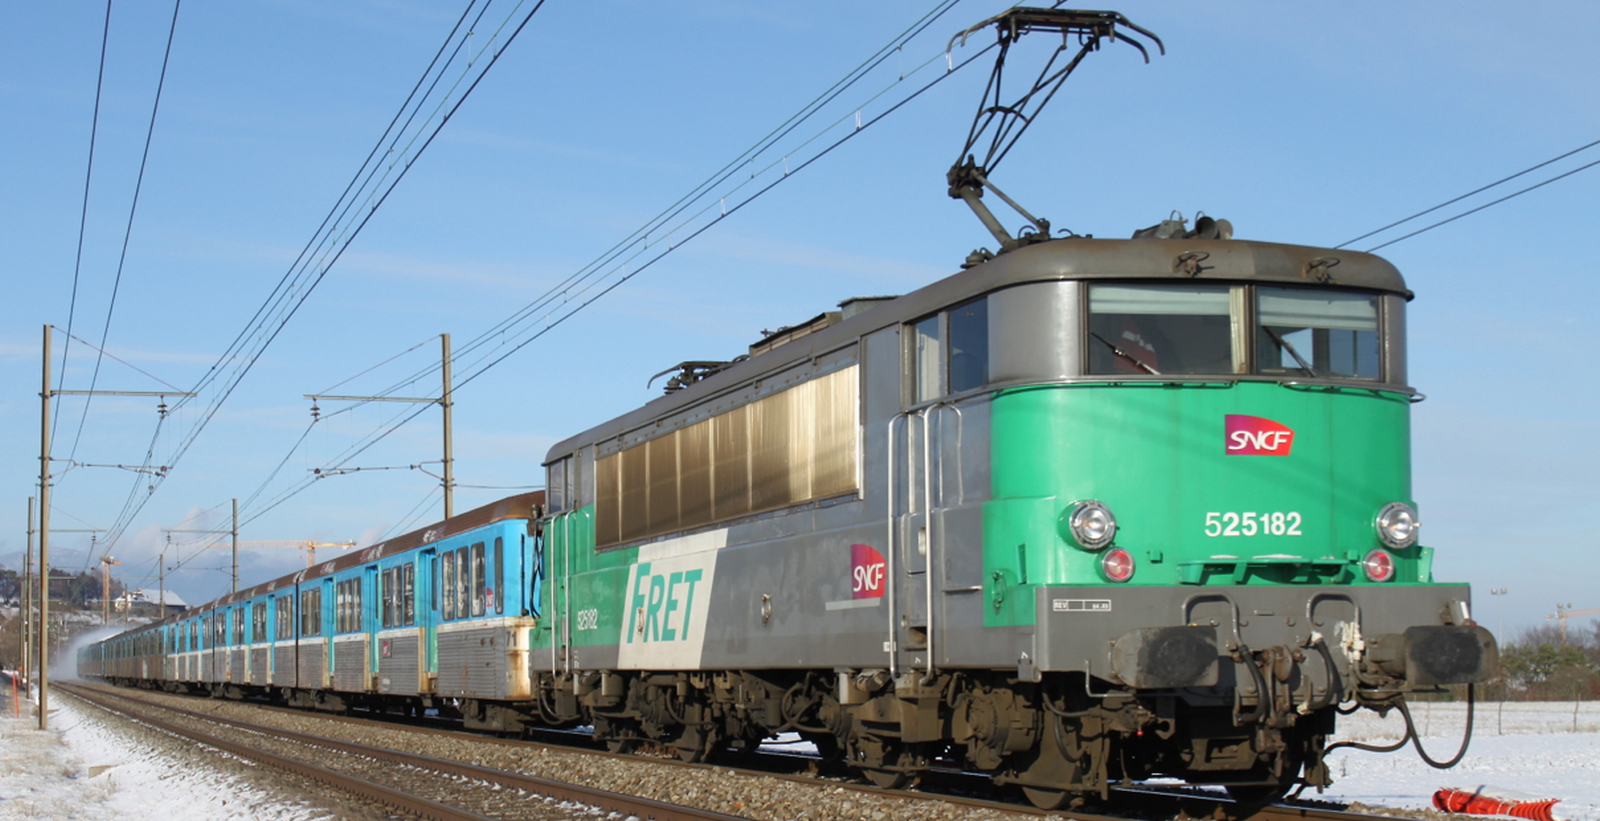 BB 25182 in January 2010 during the transfer of some RIO cars at Satigny